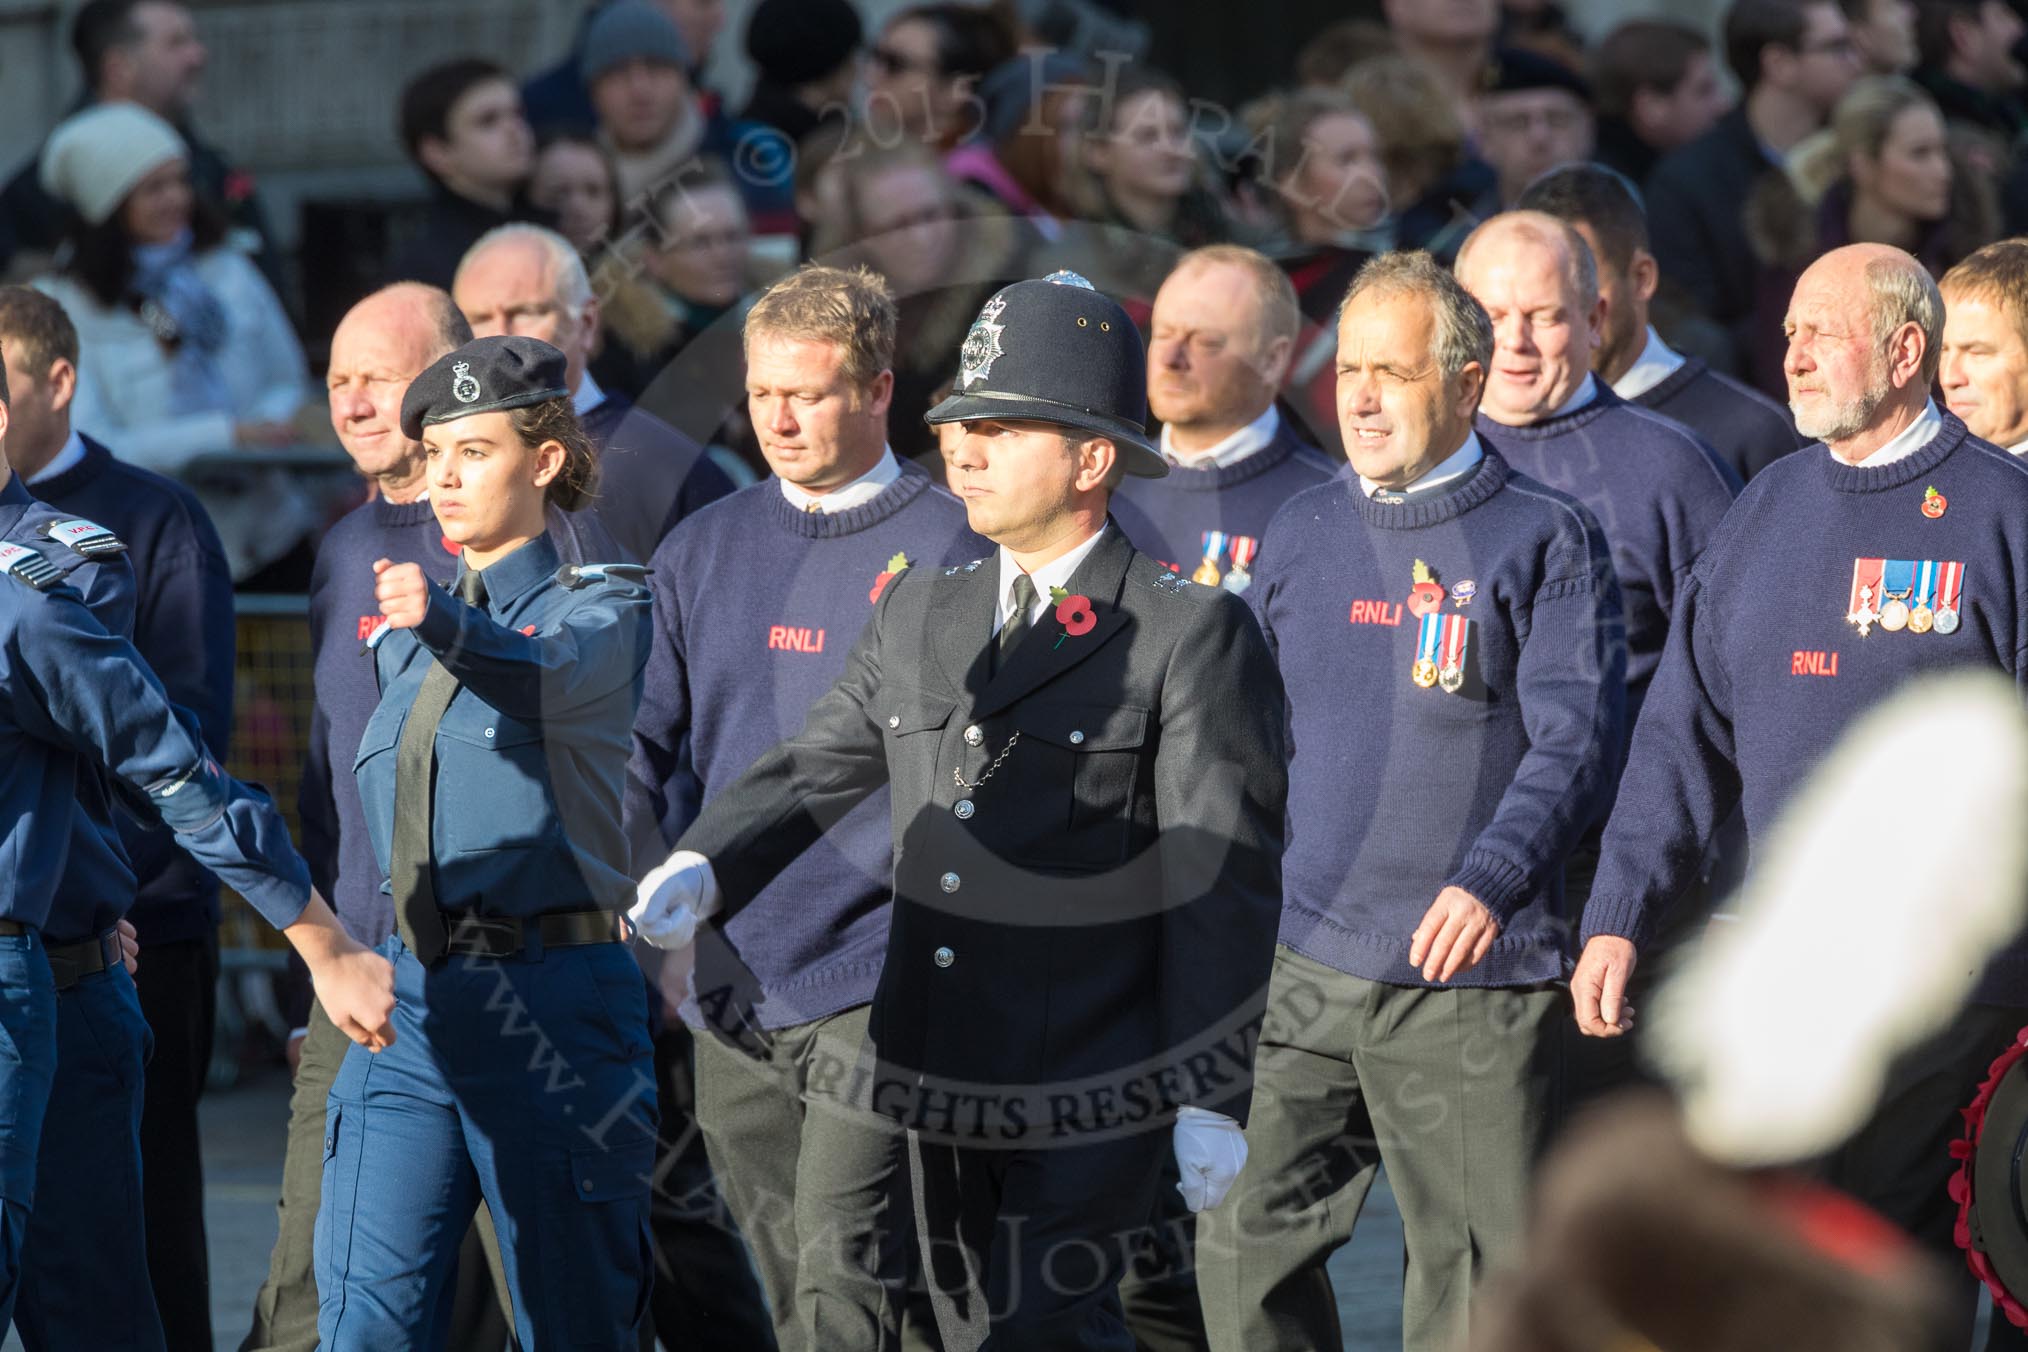 March Past, Remembrance Sunday at the Cenotaph 2016: M41 Royal National Lifeboat Institution.
Cenotaph, Whitehall, London SW1,
London,
Greater London,
United Kingdom,
on 13 November 2016 at 13:19, image #2948